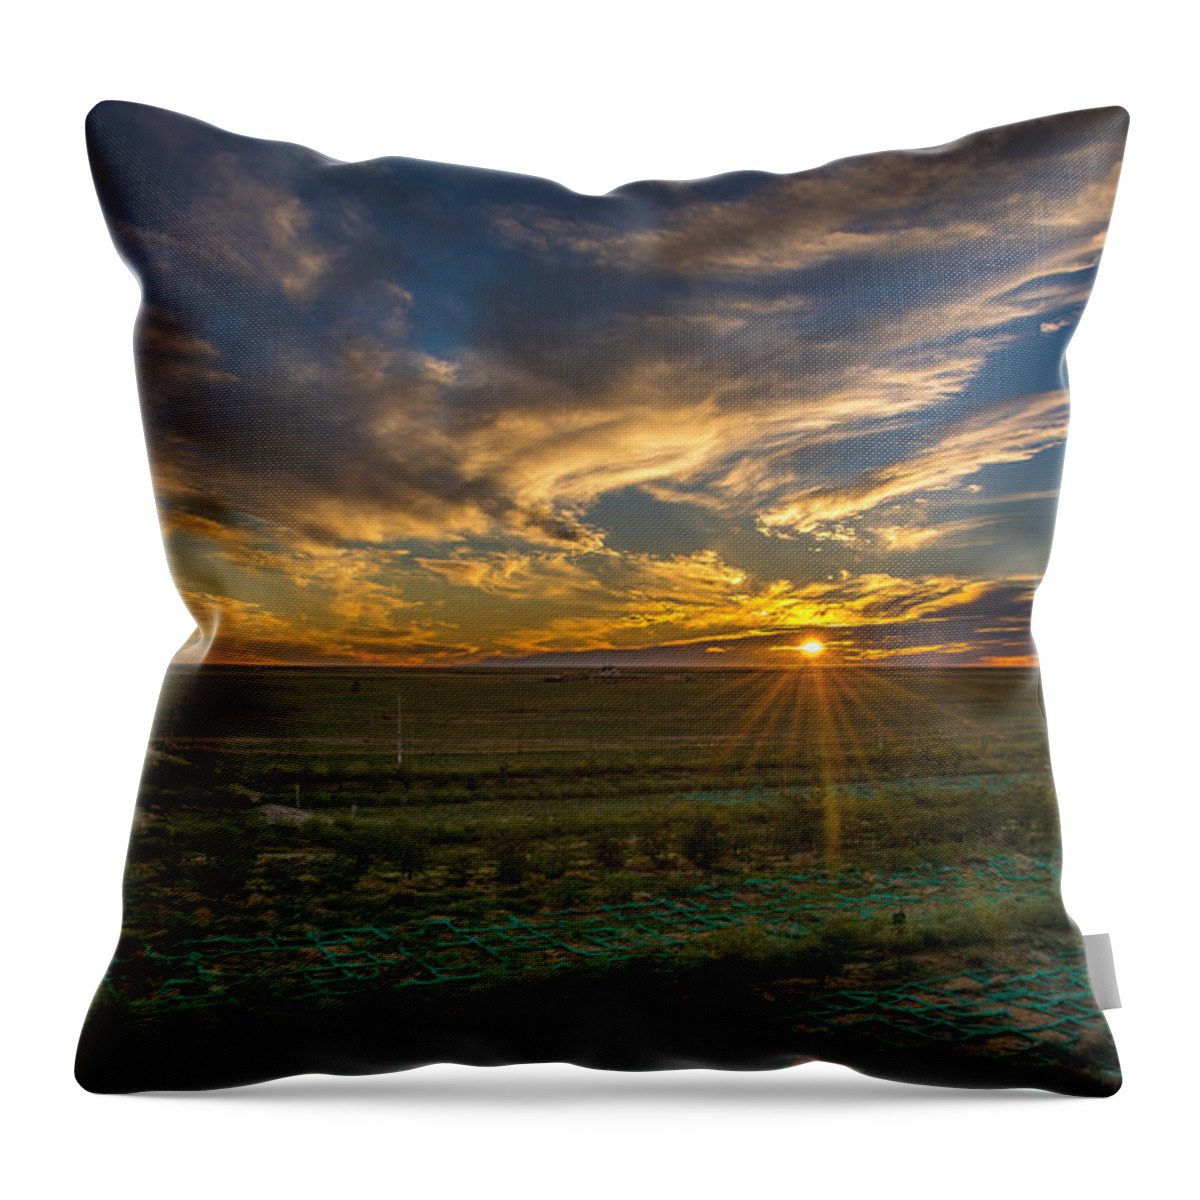 China Throw Pillow featuring the photograph Sunset Over China by Andrew Matwijec